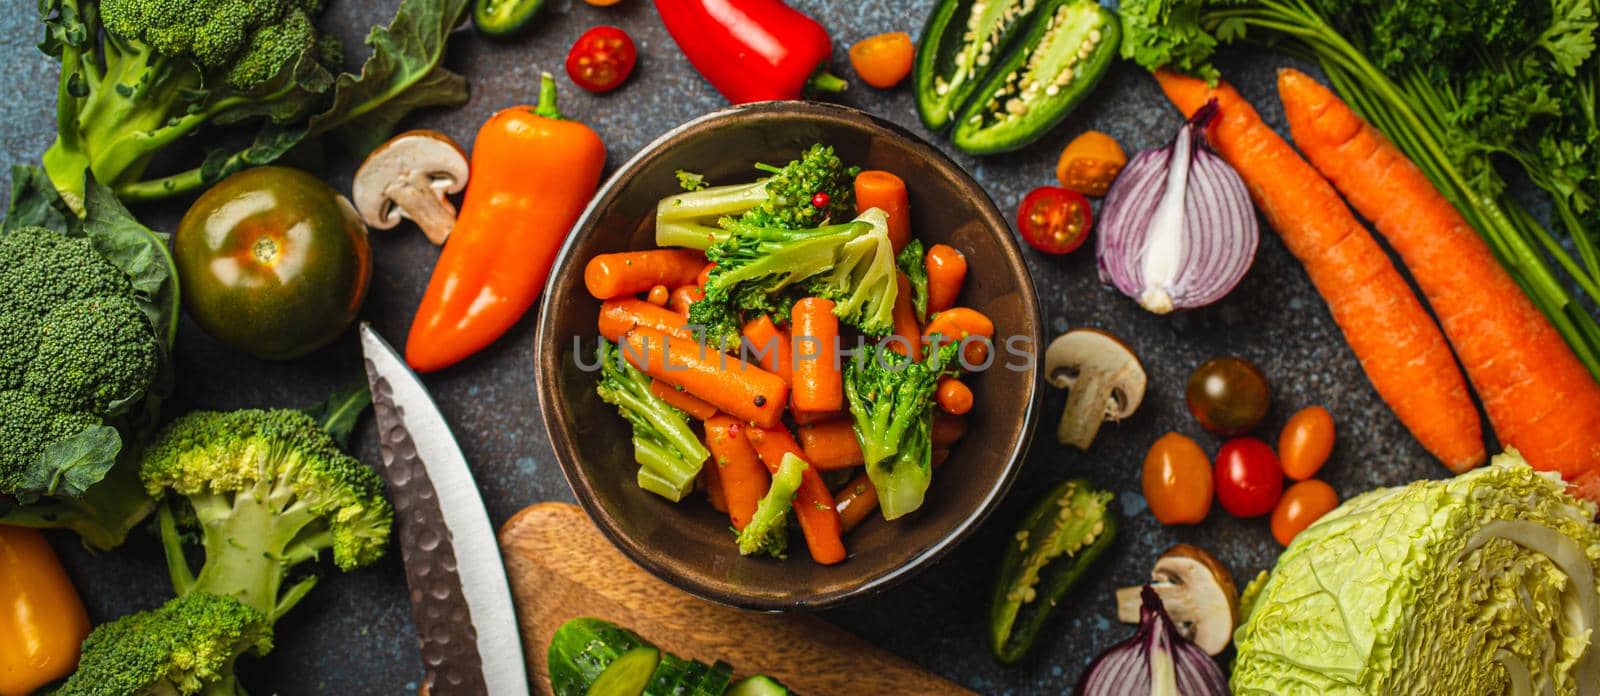 Steamed carrot broccoli salad in bowl and assorted cut fresh vegetables on rustic concrete table, wooden cutting board, kitchen knife from above, vegetarian or diet clean healthy food concept